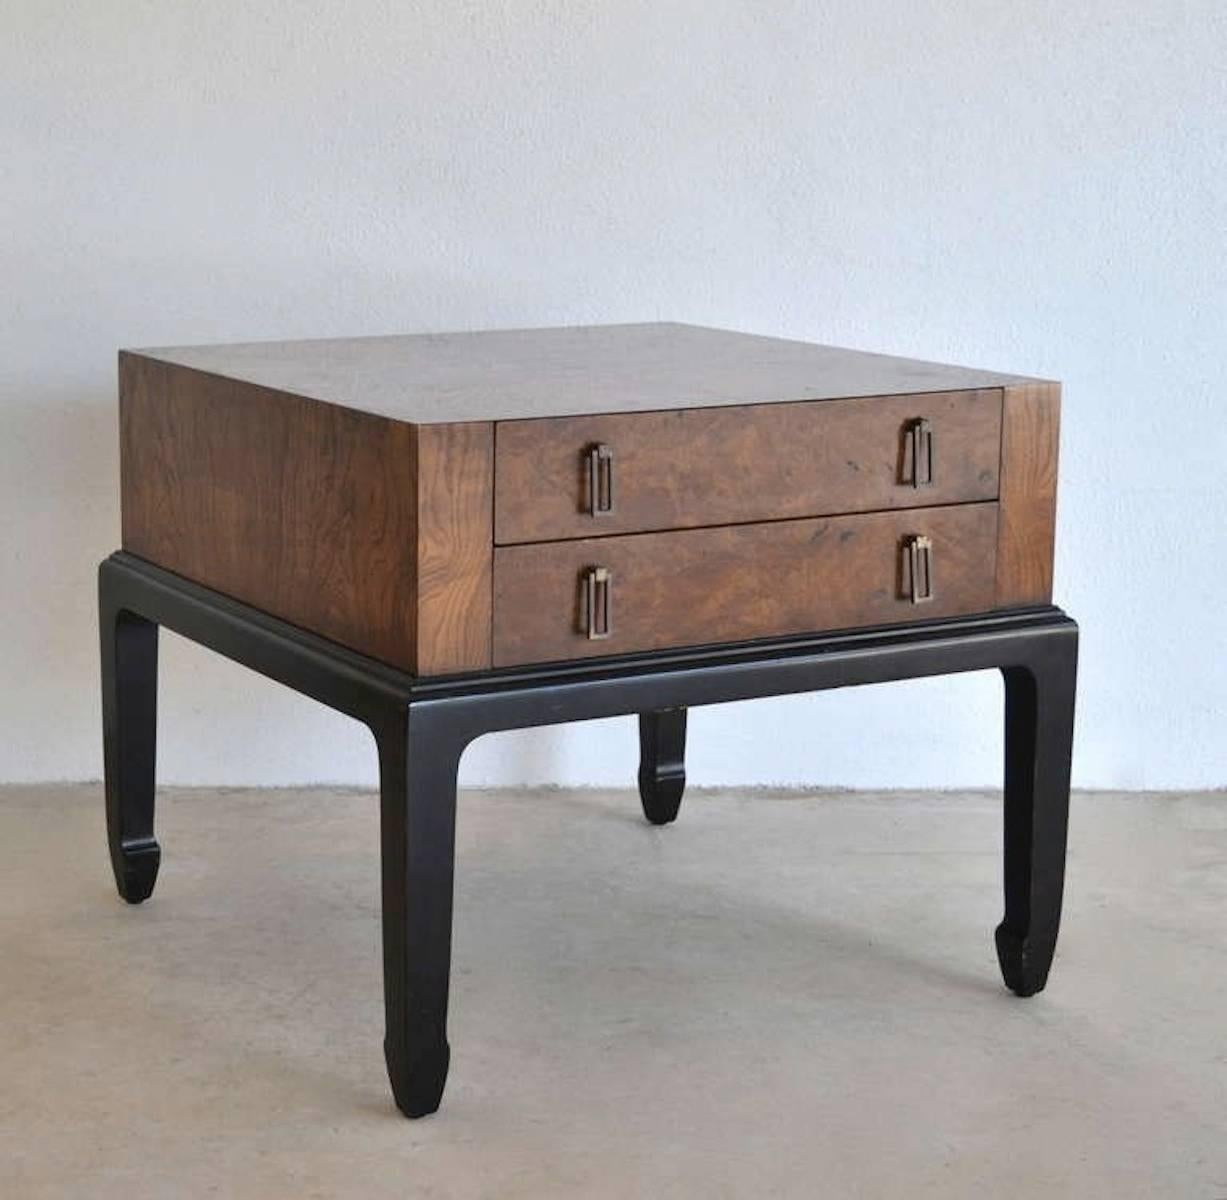 Striking midcentury burl wood side table, circa 1960s. This incredible nightstand is designed as a two-drawer chest mounted on an ebonized base and is accented with rectangular brass pulls.